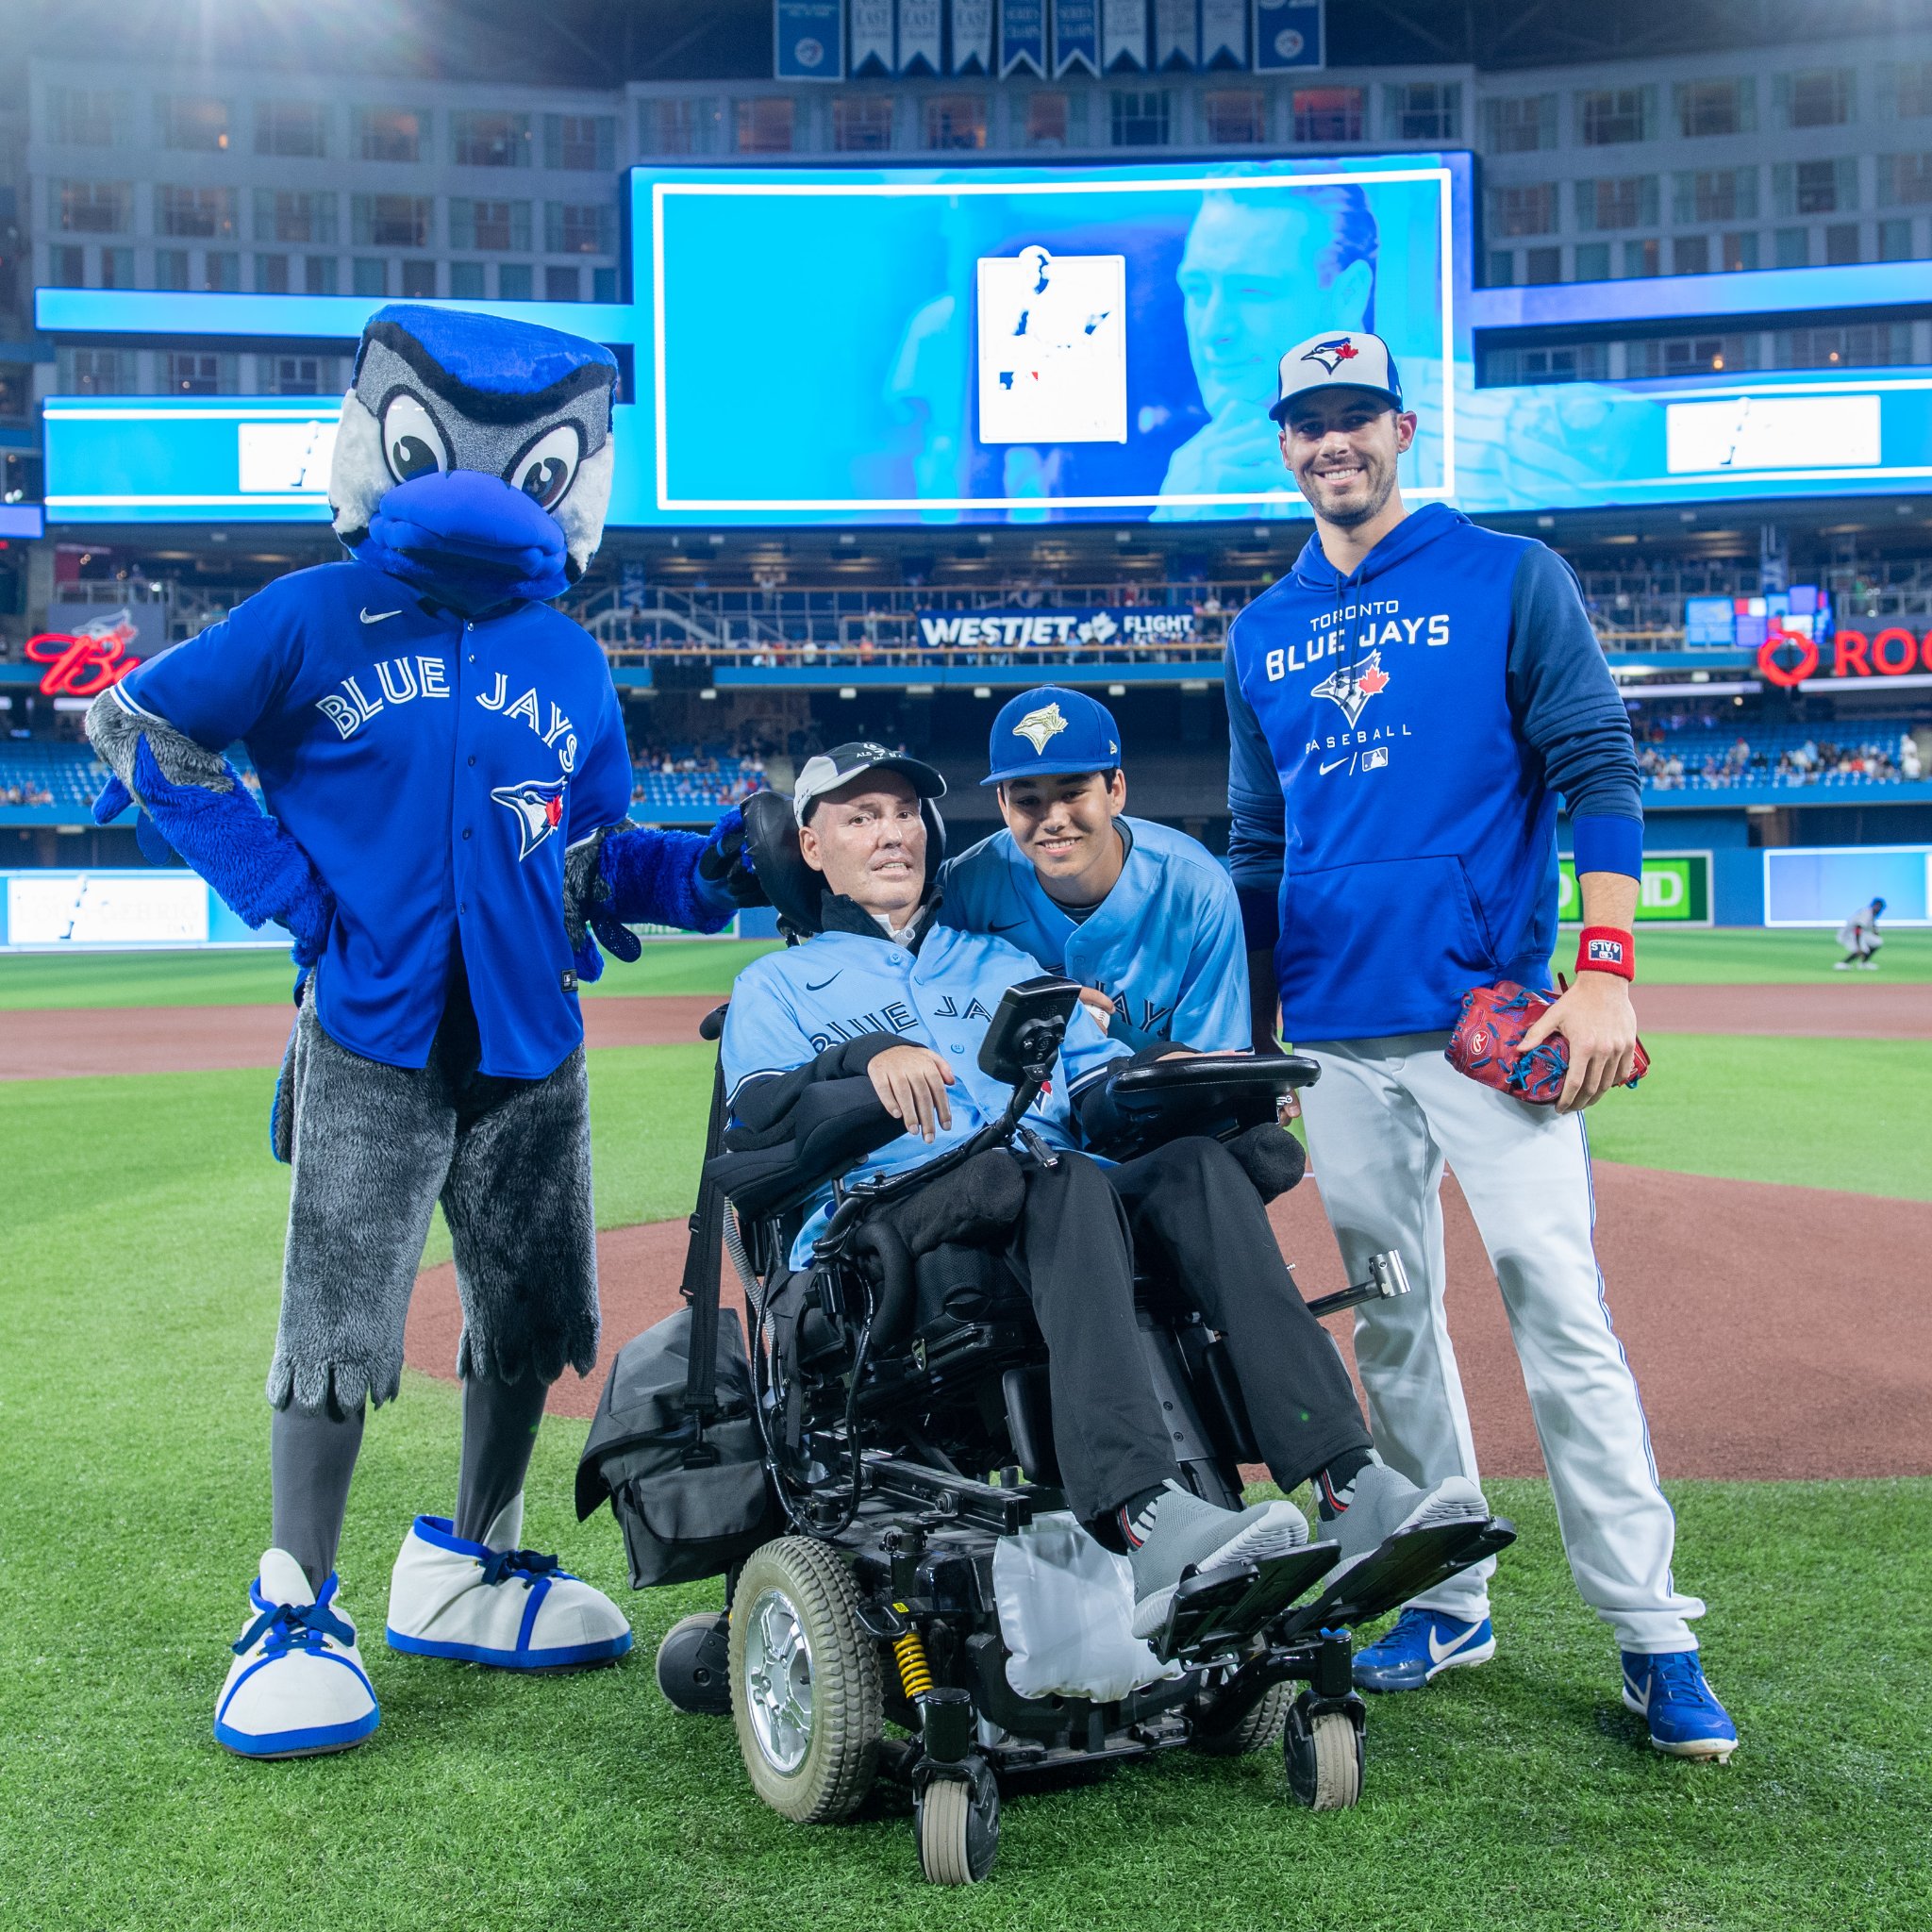 Peter and his son, Zachary, posing on the baseball pitch with Blue Jays pitcher, Julian Merryweather, and mascot, Ace.